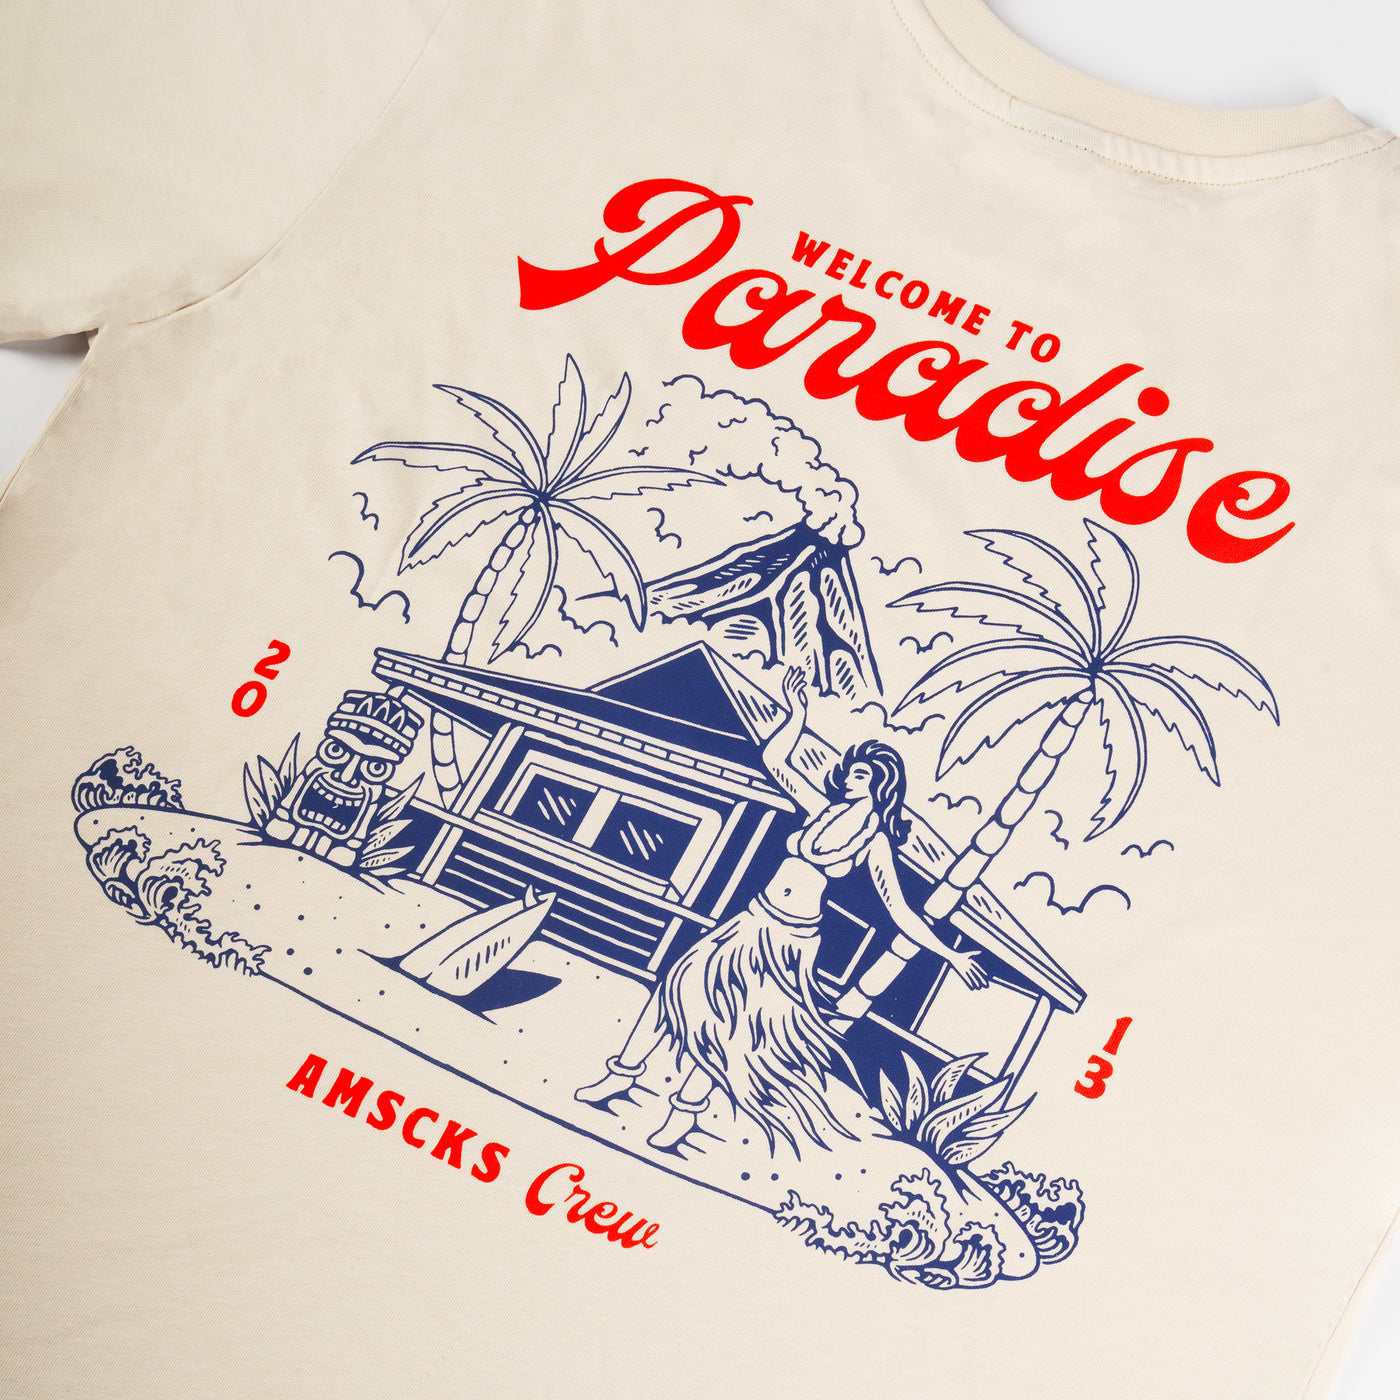 Welcome to Paradise - Tシャツ